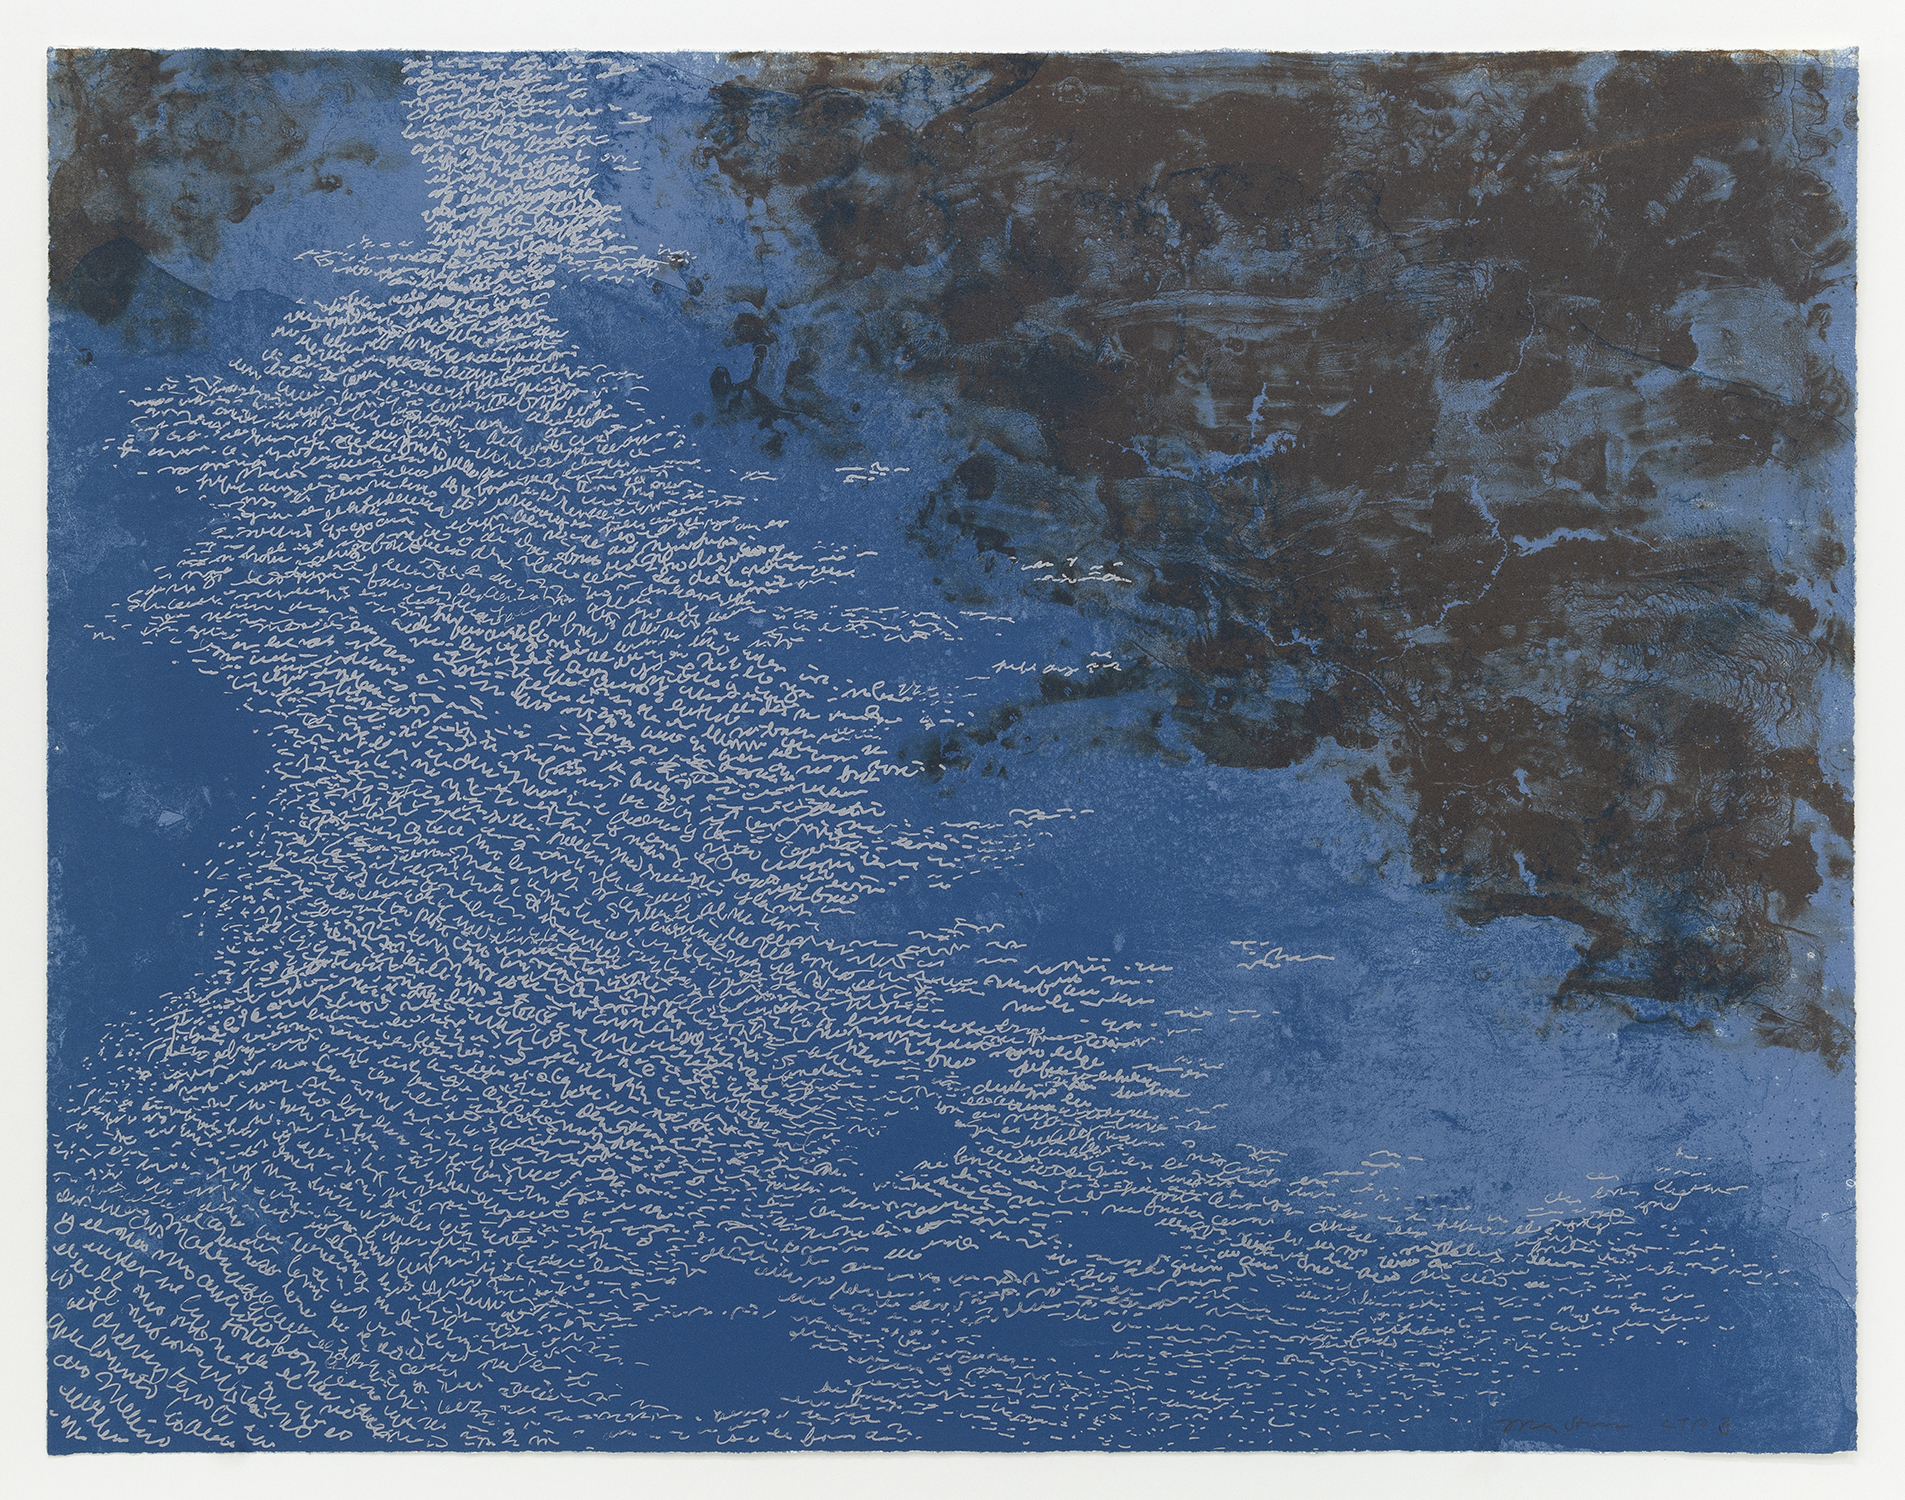 Water is a Gift, 2003, Lithograph, 19 x 25 inches (48.3 x 63.5 cm)